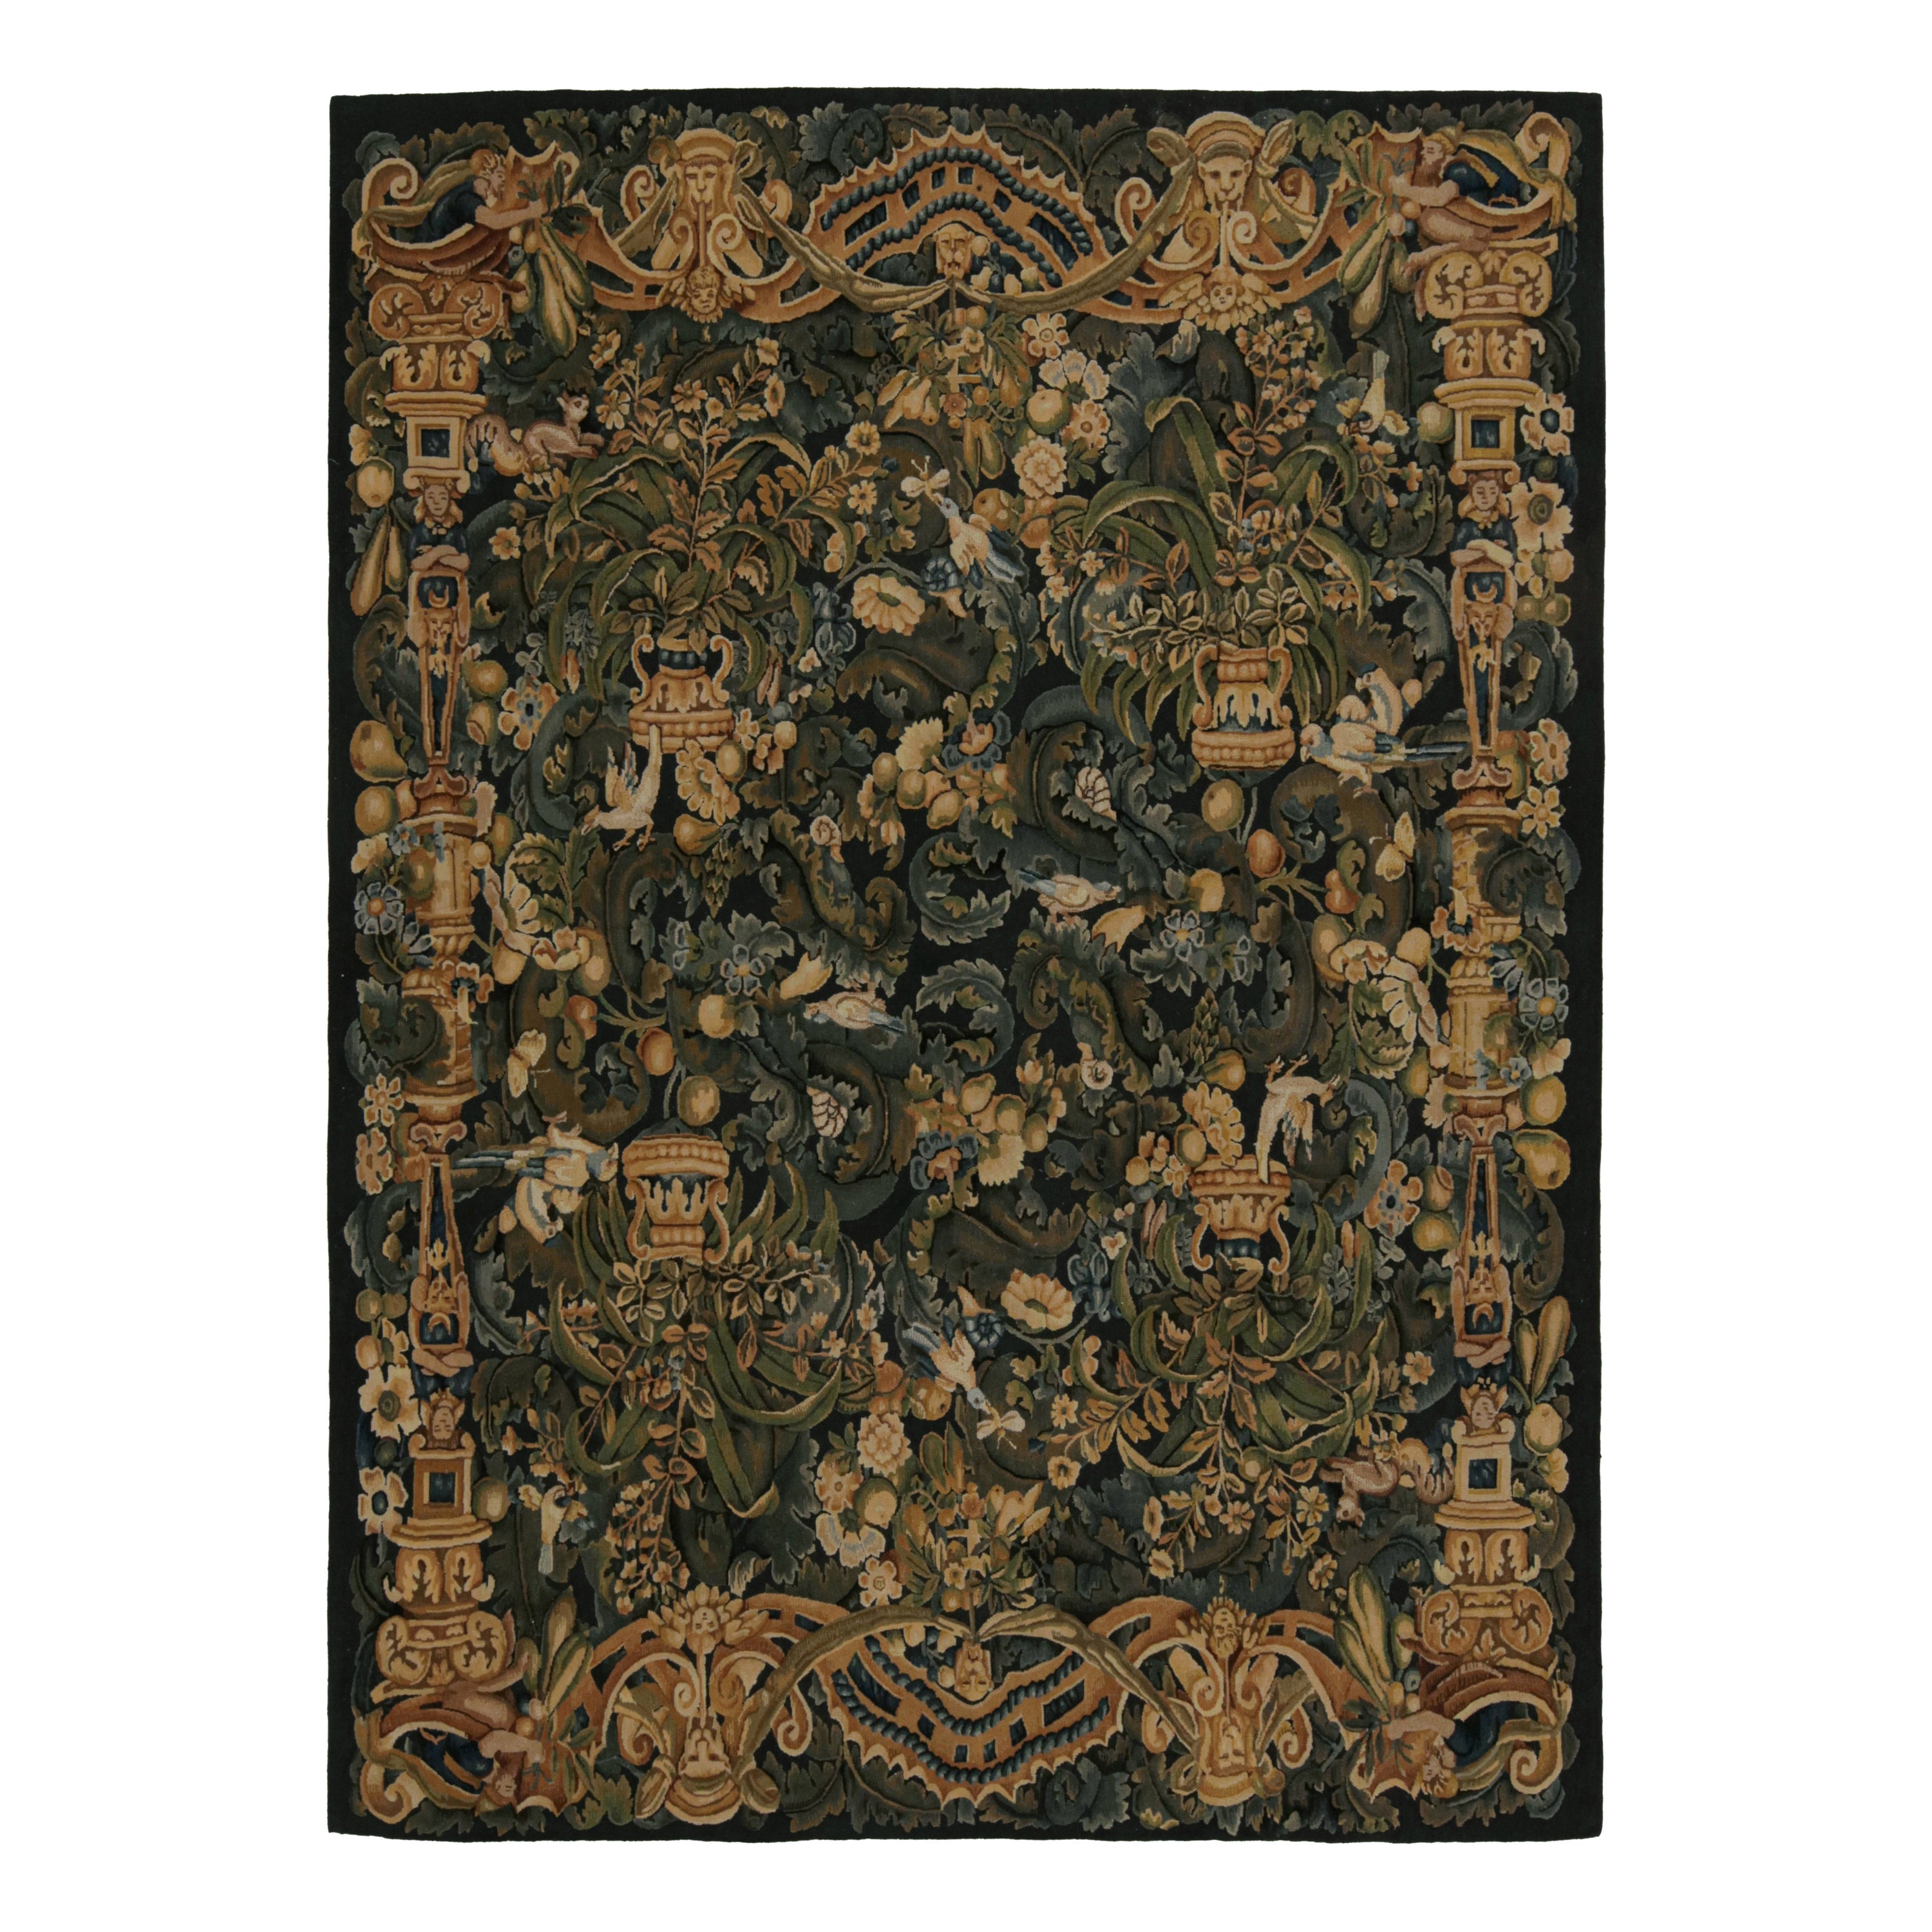 Rug & Kilim’s European Tudor Flatweave Rug with Floral Patterns and Pictorials